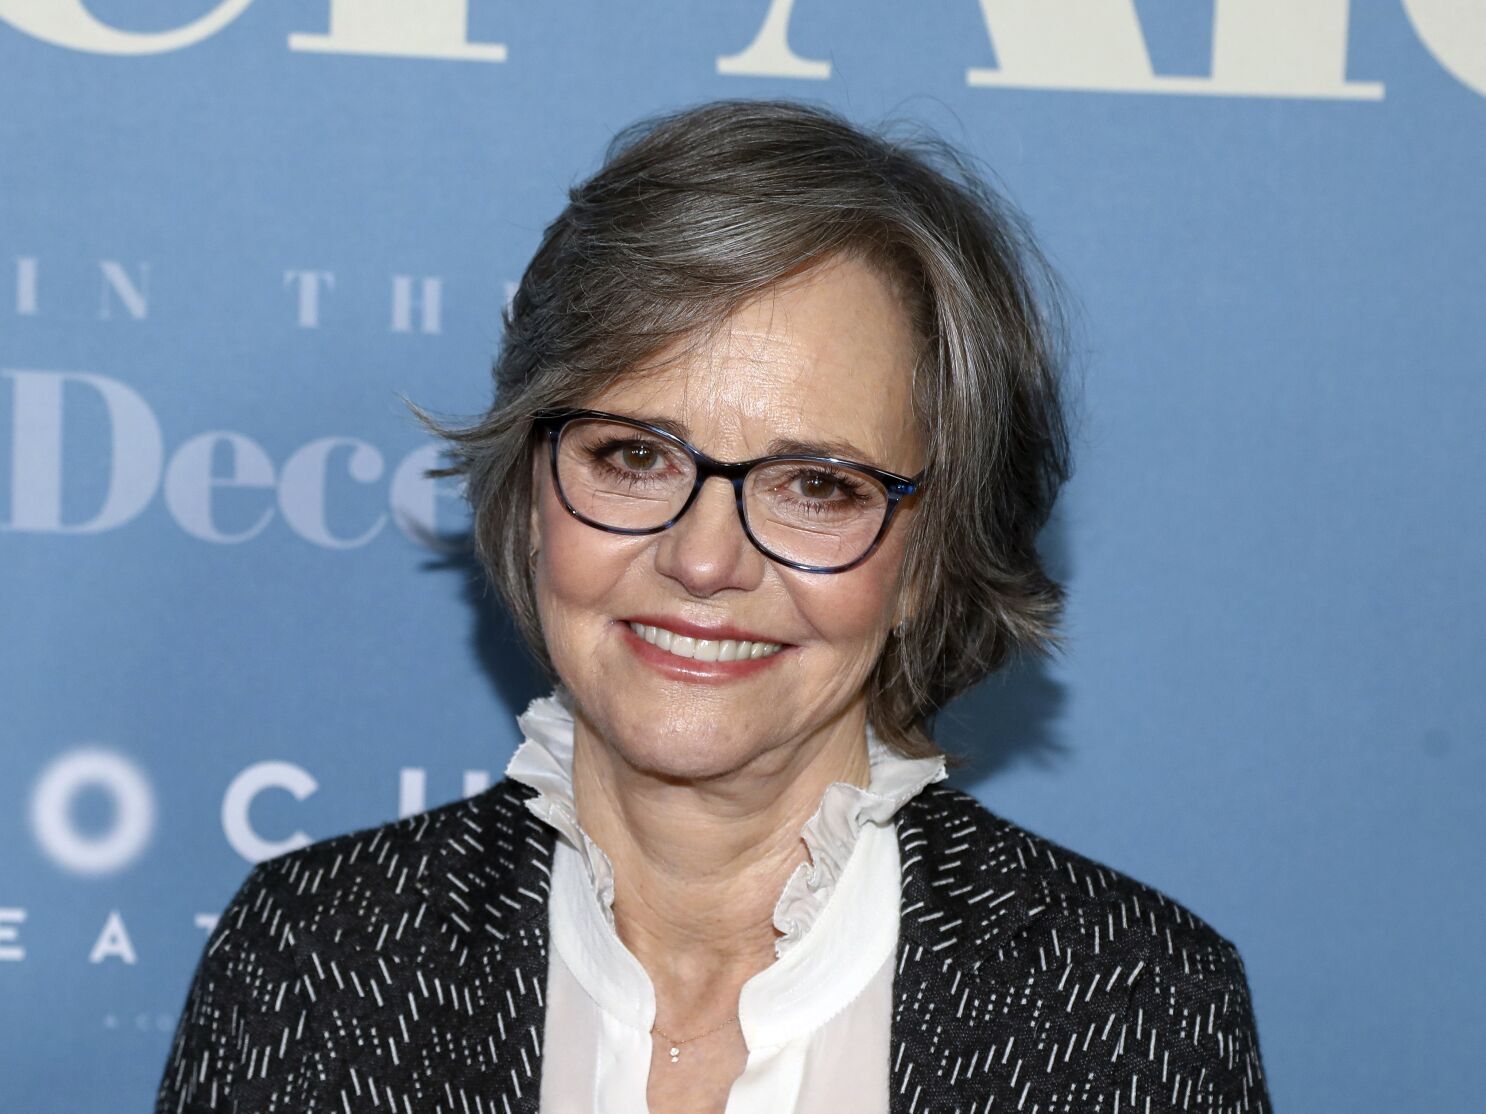 Has Sally Field Remarried? Why This News so Trending on Social Media? 